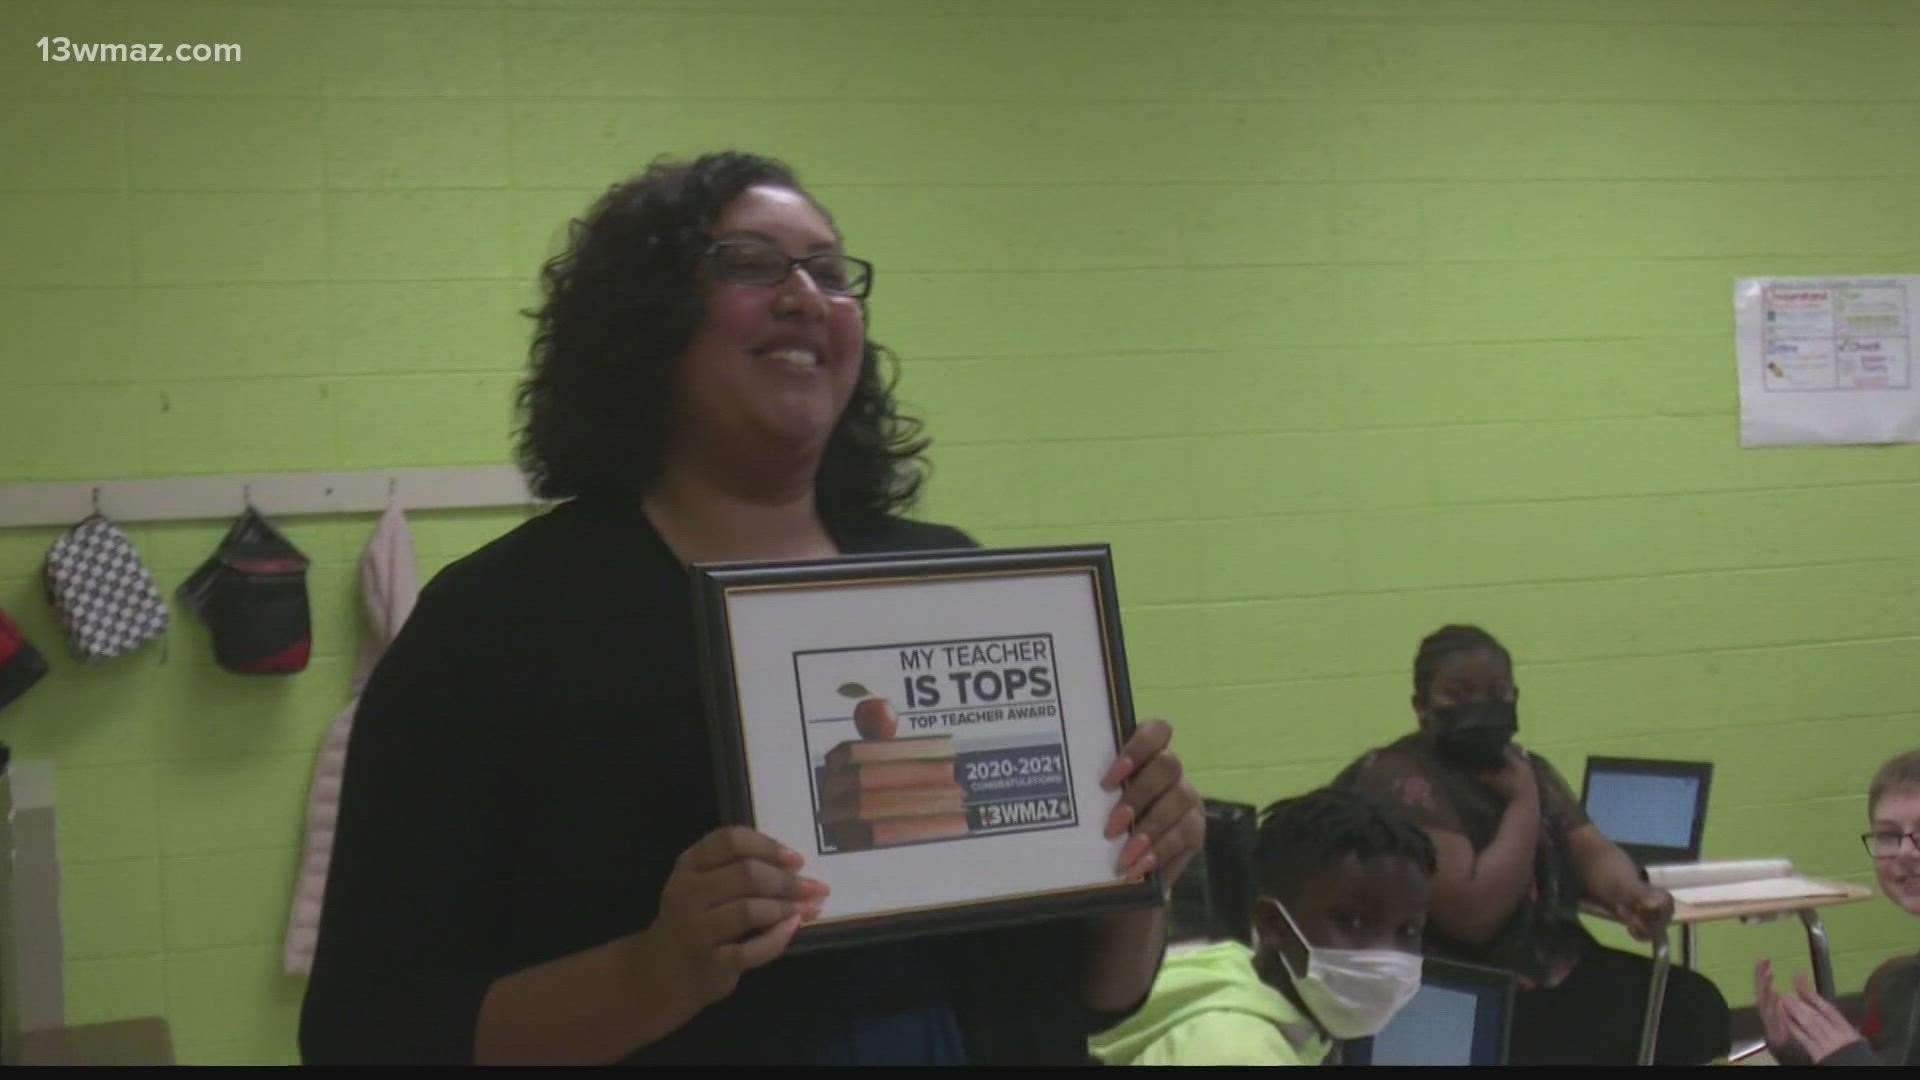 This week's top teacher puts the 'Peach' in 'Teach' when it comes to her students.